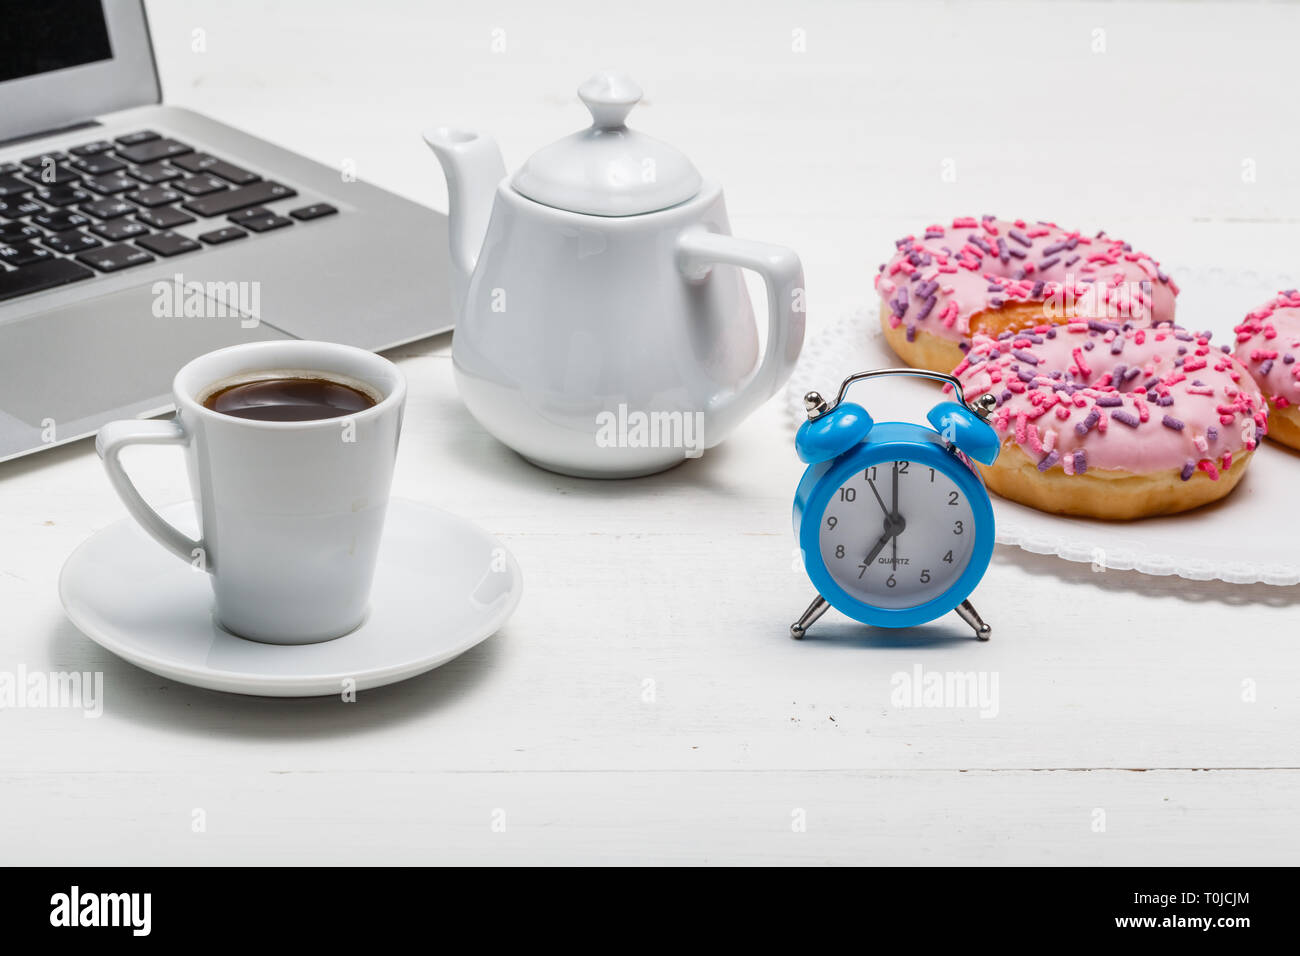 Fresh donut served with a cup of coffee Stock Photo